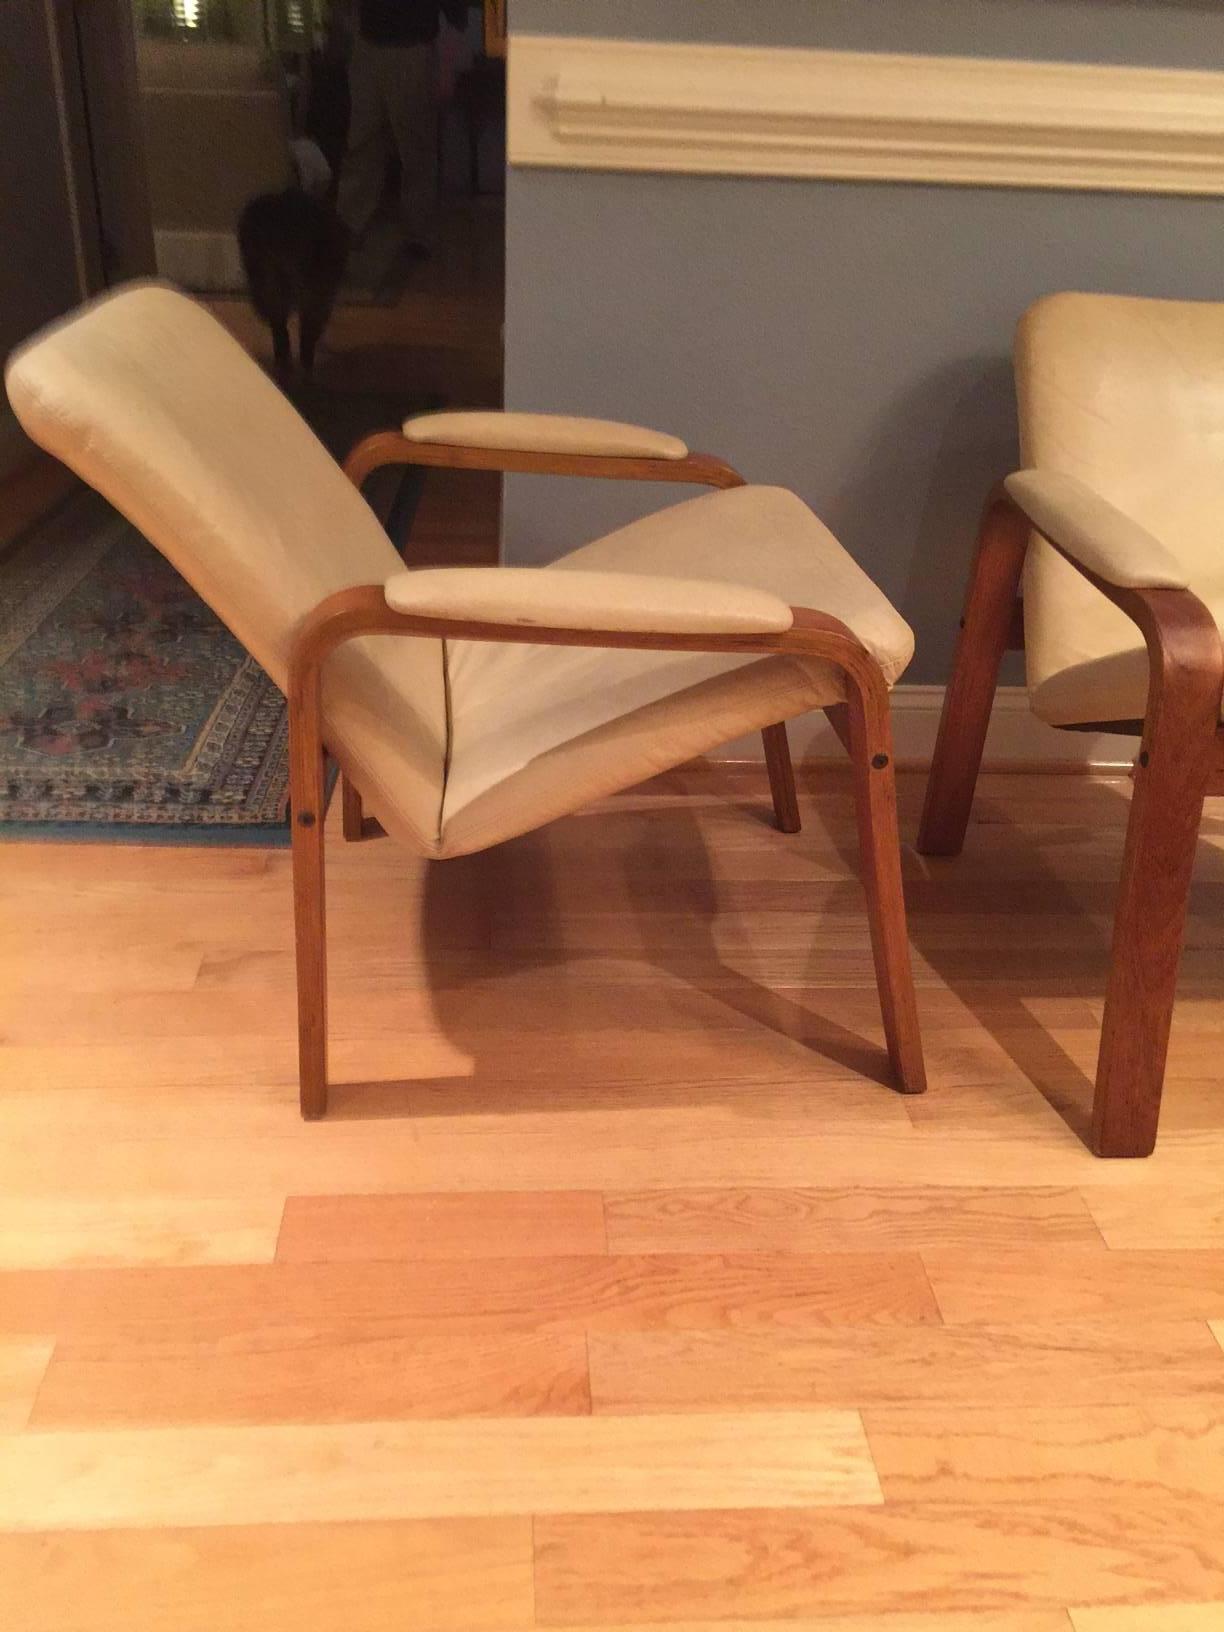 This pair of Ekornes lounge or armchairs are produced by J.E. Ekornes, circa 1970s, in Norway. The frames are solid teak and in excellent condition. The leather is showing signs of wear. Ekornes ASA is the largest furniture manufacturer in the